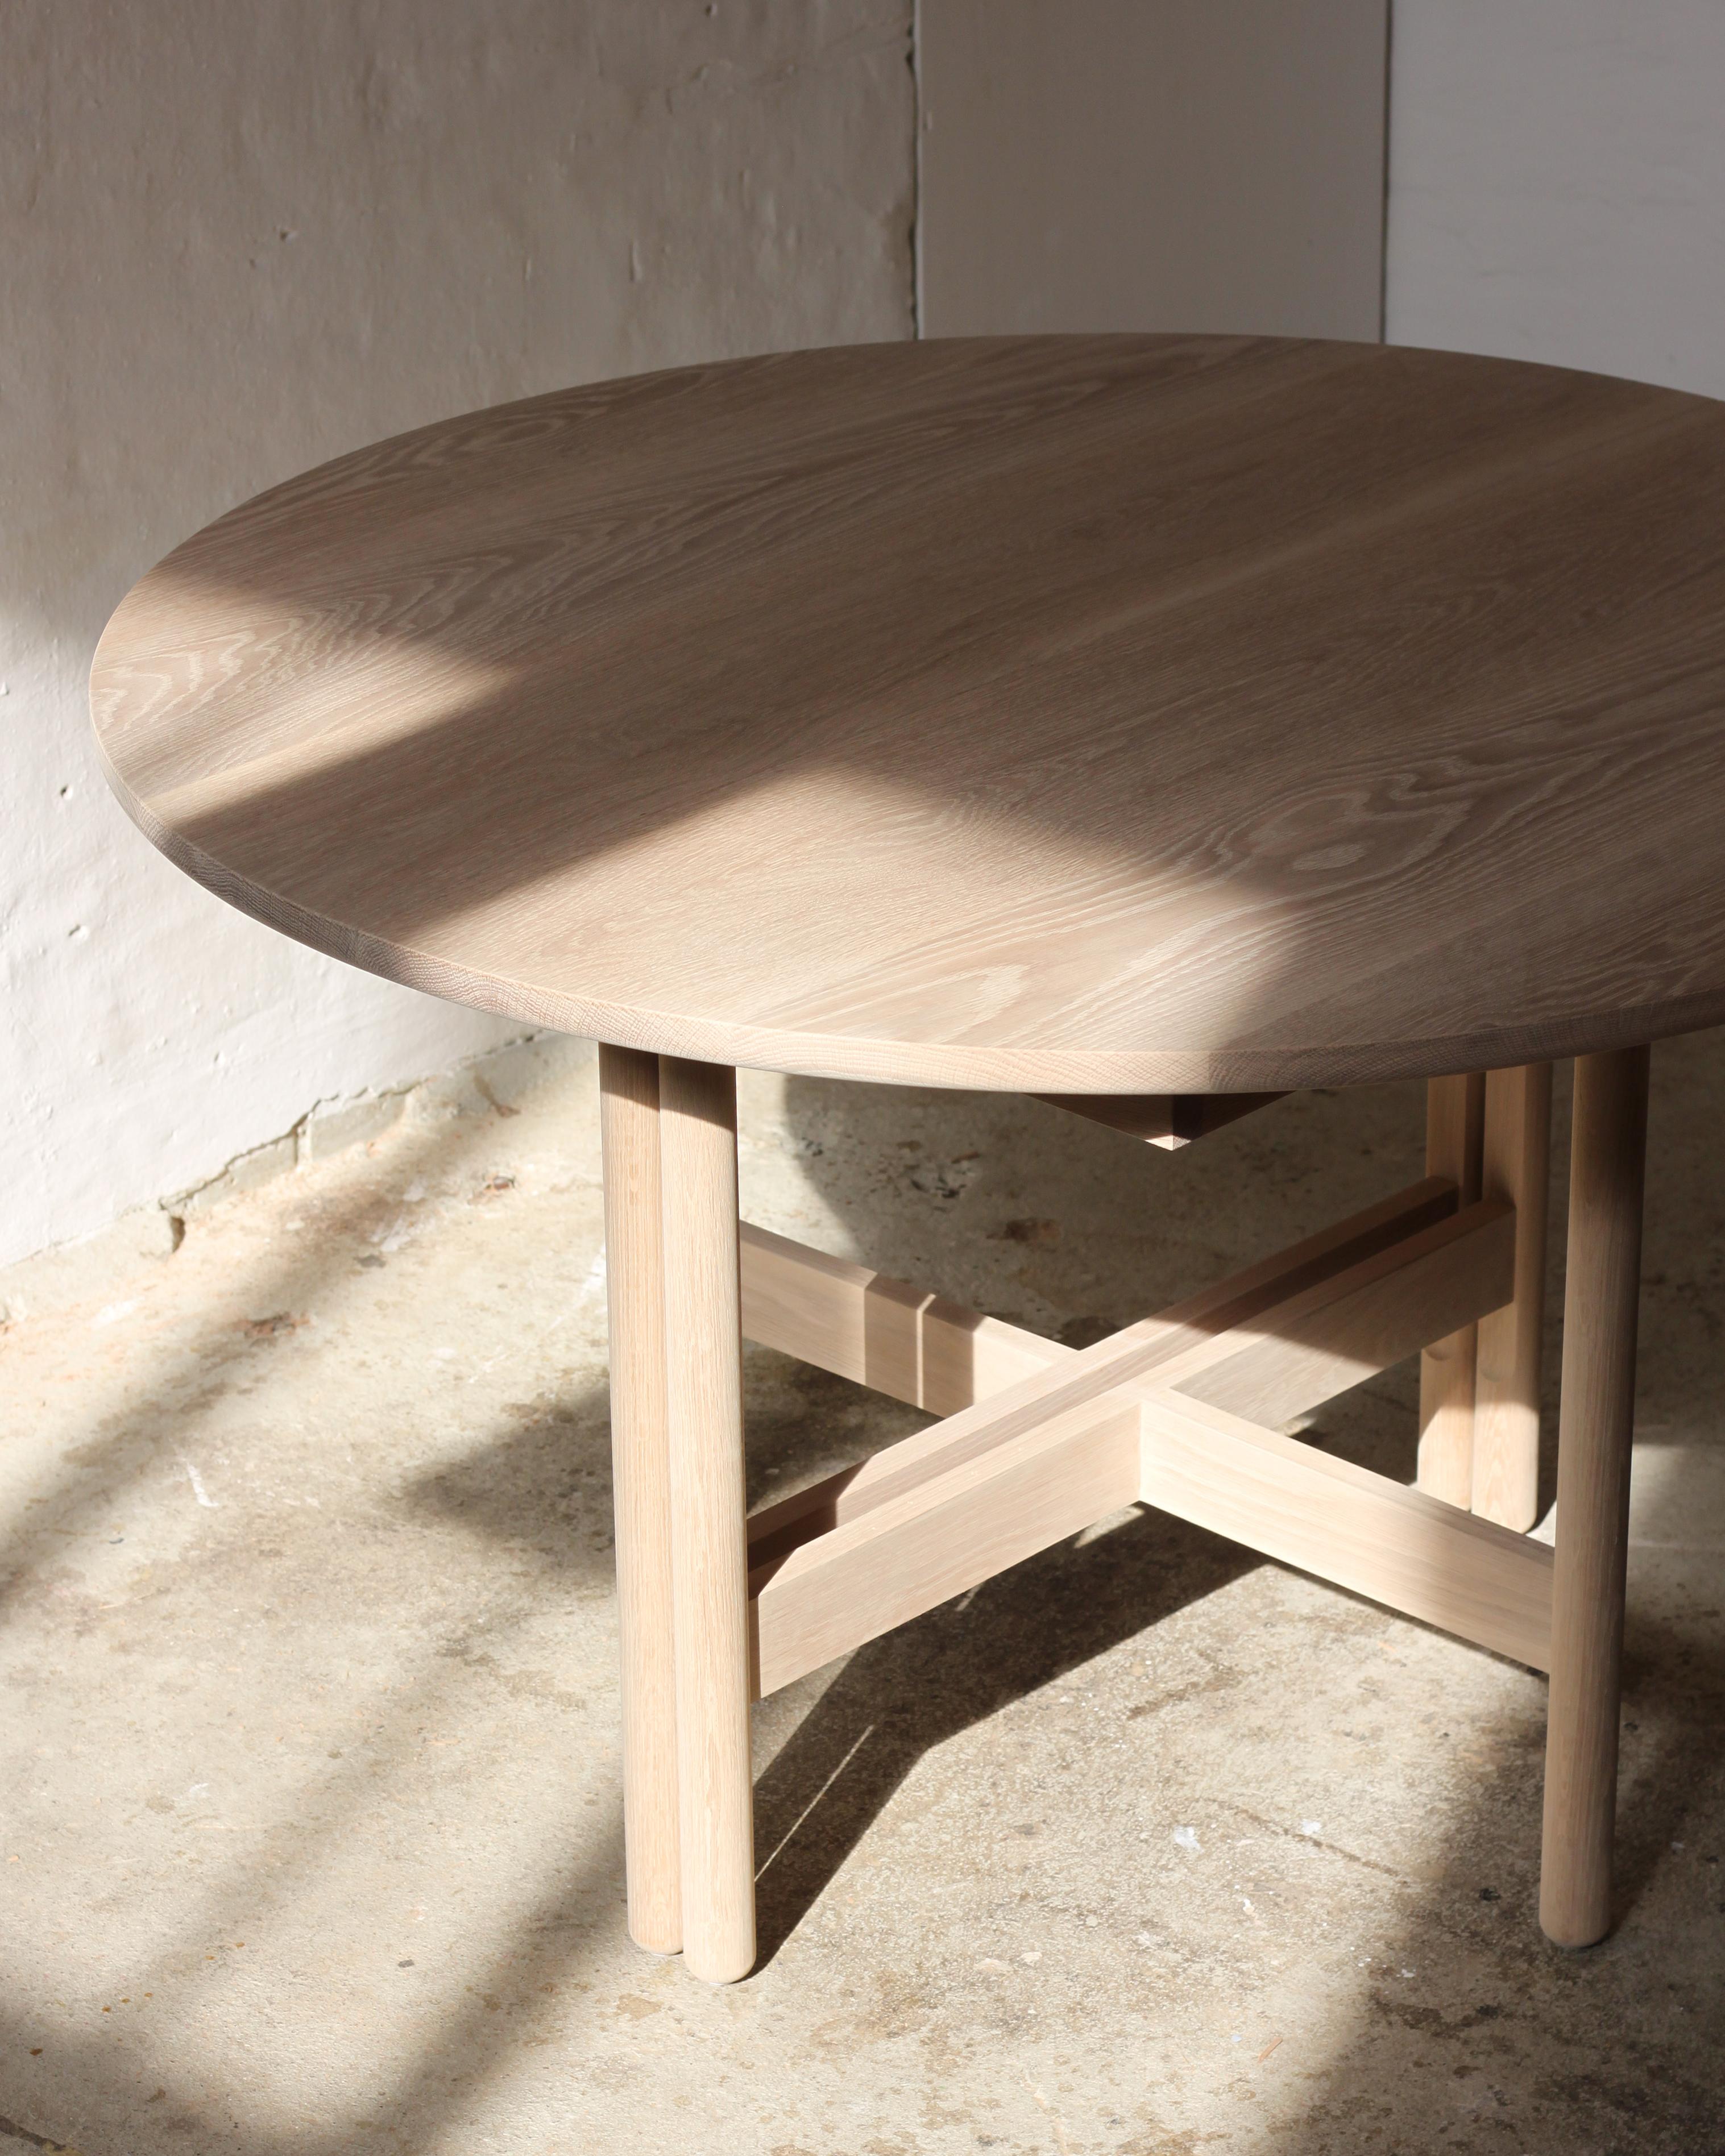 Contemporary Handmade Thea Dining Table, Extendable Ø130cm - Oak - by BACD studio For Sale